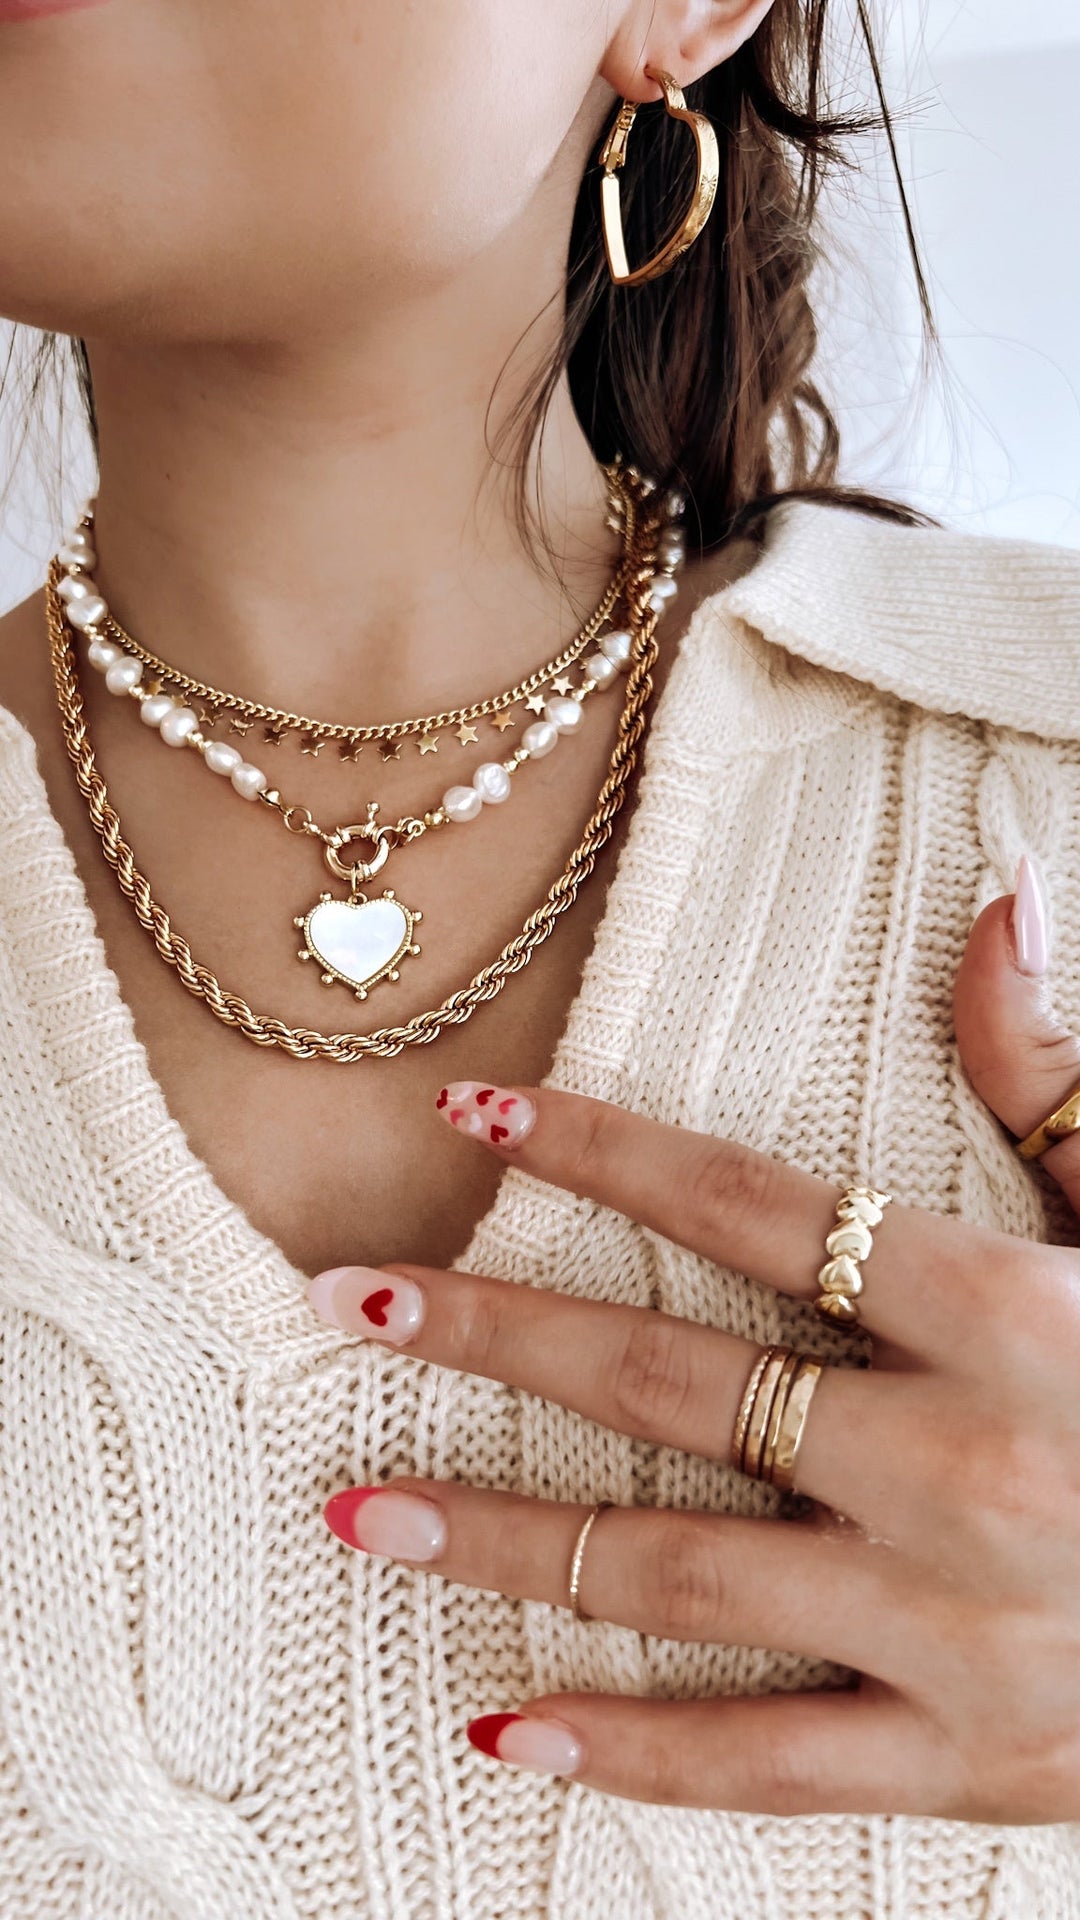 Big Love Pearl Necklace - Gold Filled